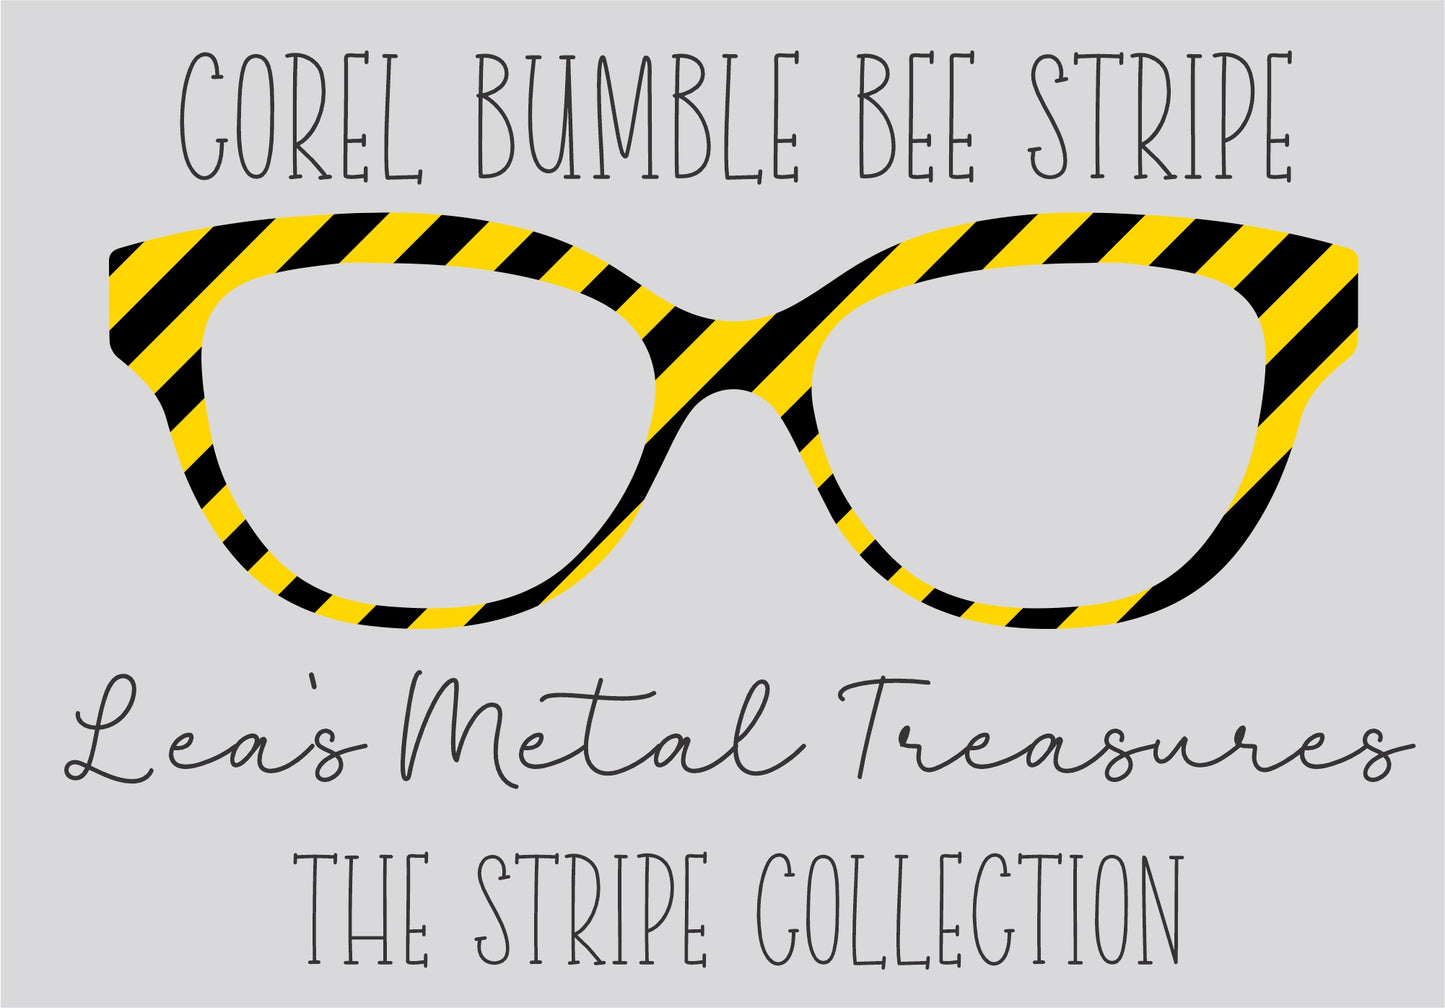 COREL BUMBLE BEE STRIPES Eyewear Frame Toppers COMES WITH MAGNETS